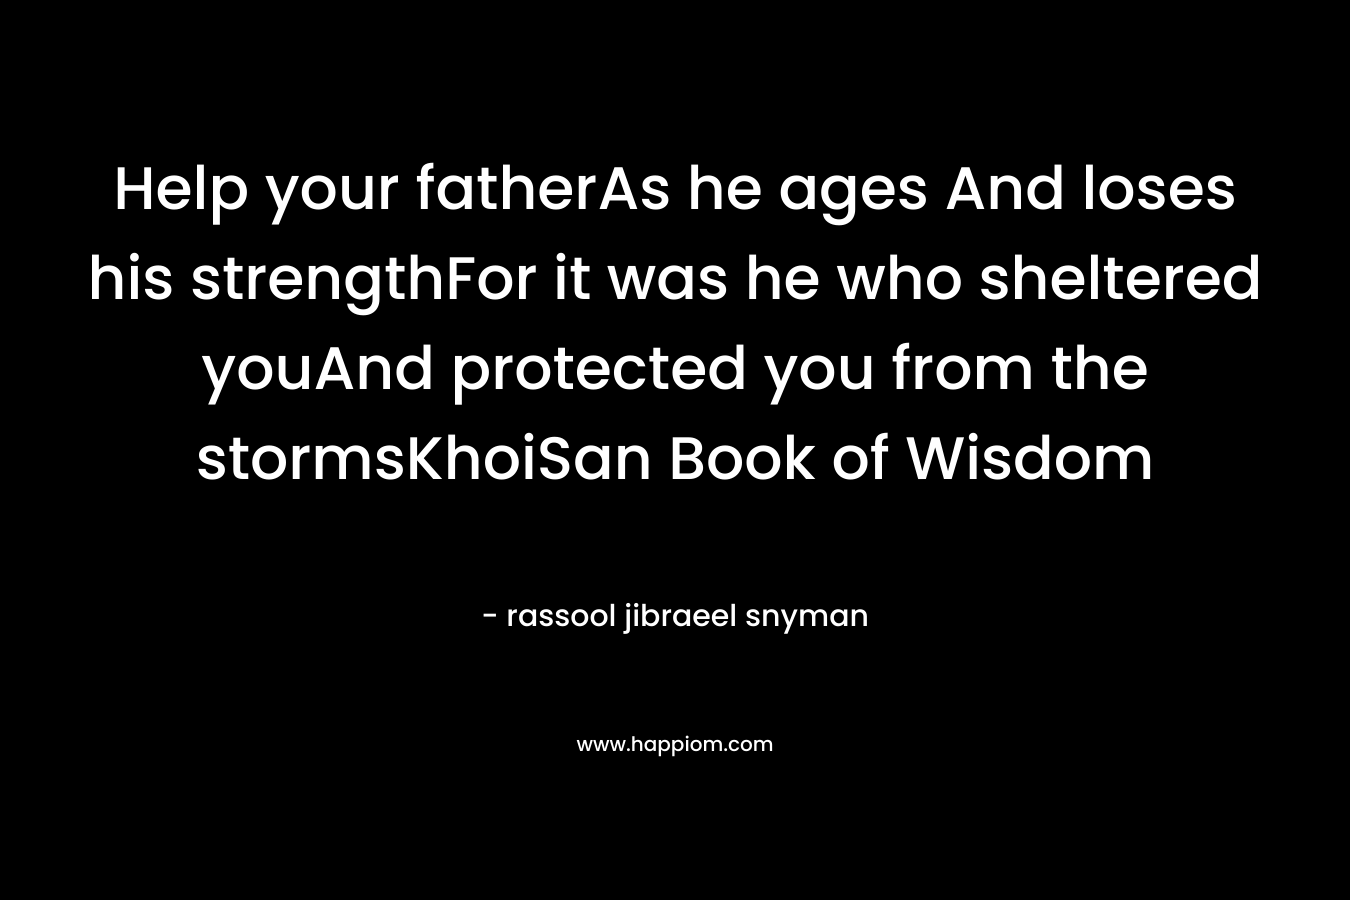 Help your fatherAs he ages And loses his strengthFor it was he who sheltered youAnd protected you from the stormsKhoiSan Book of Wisdom